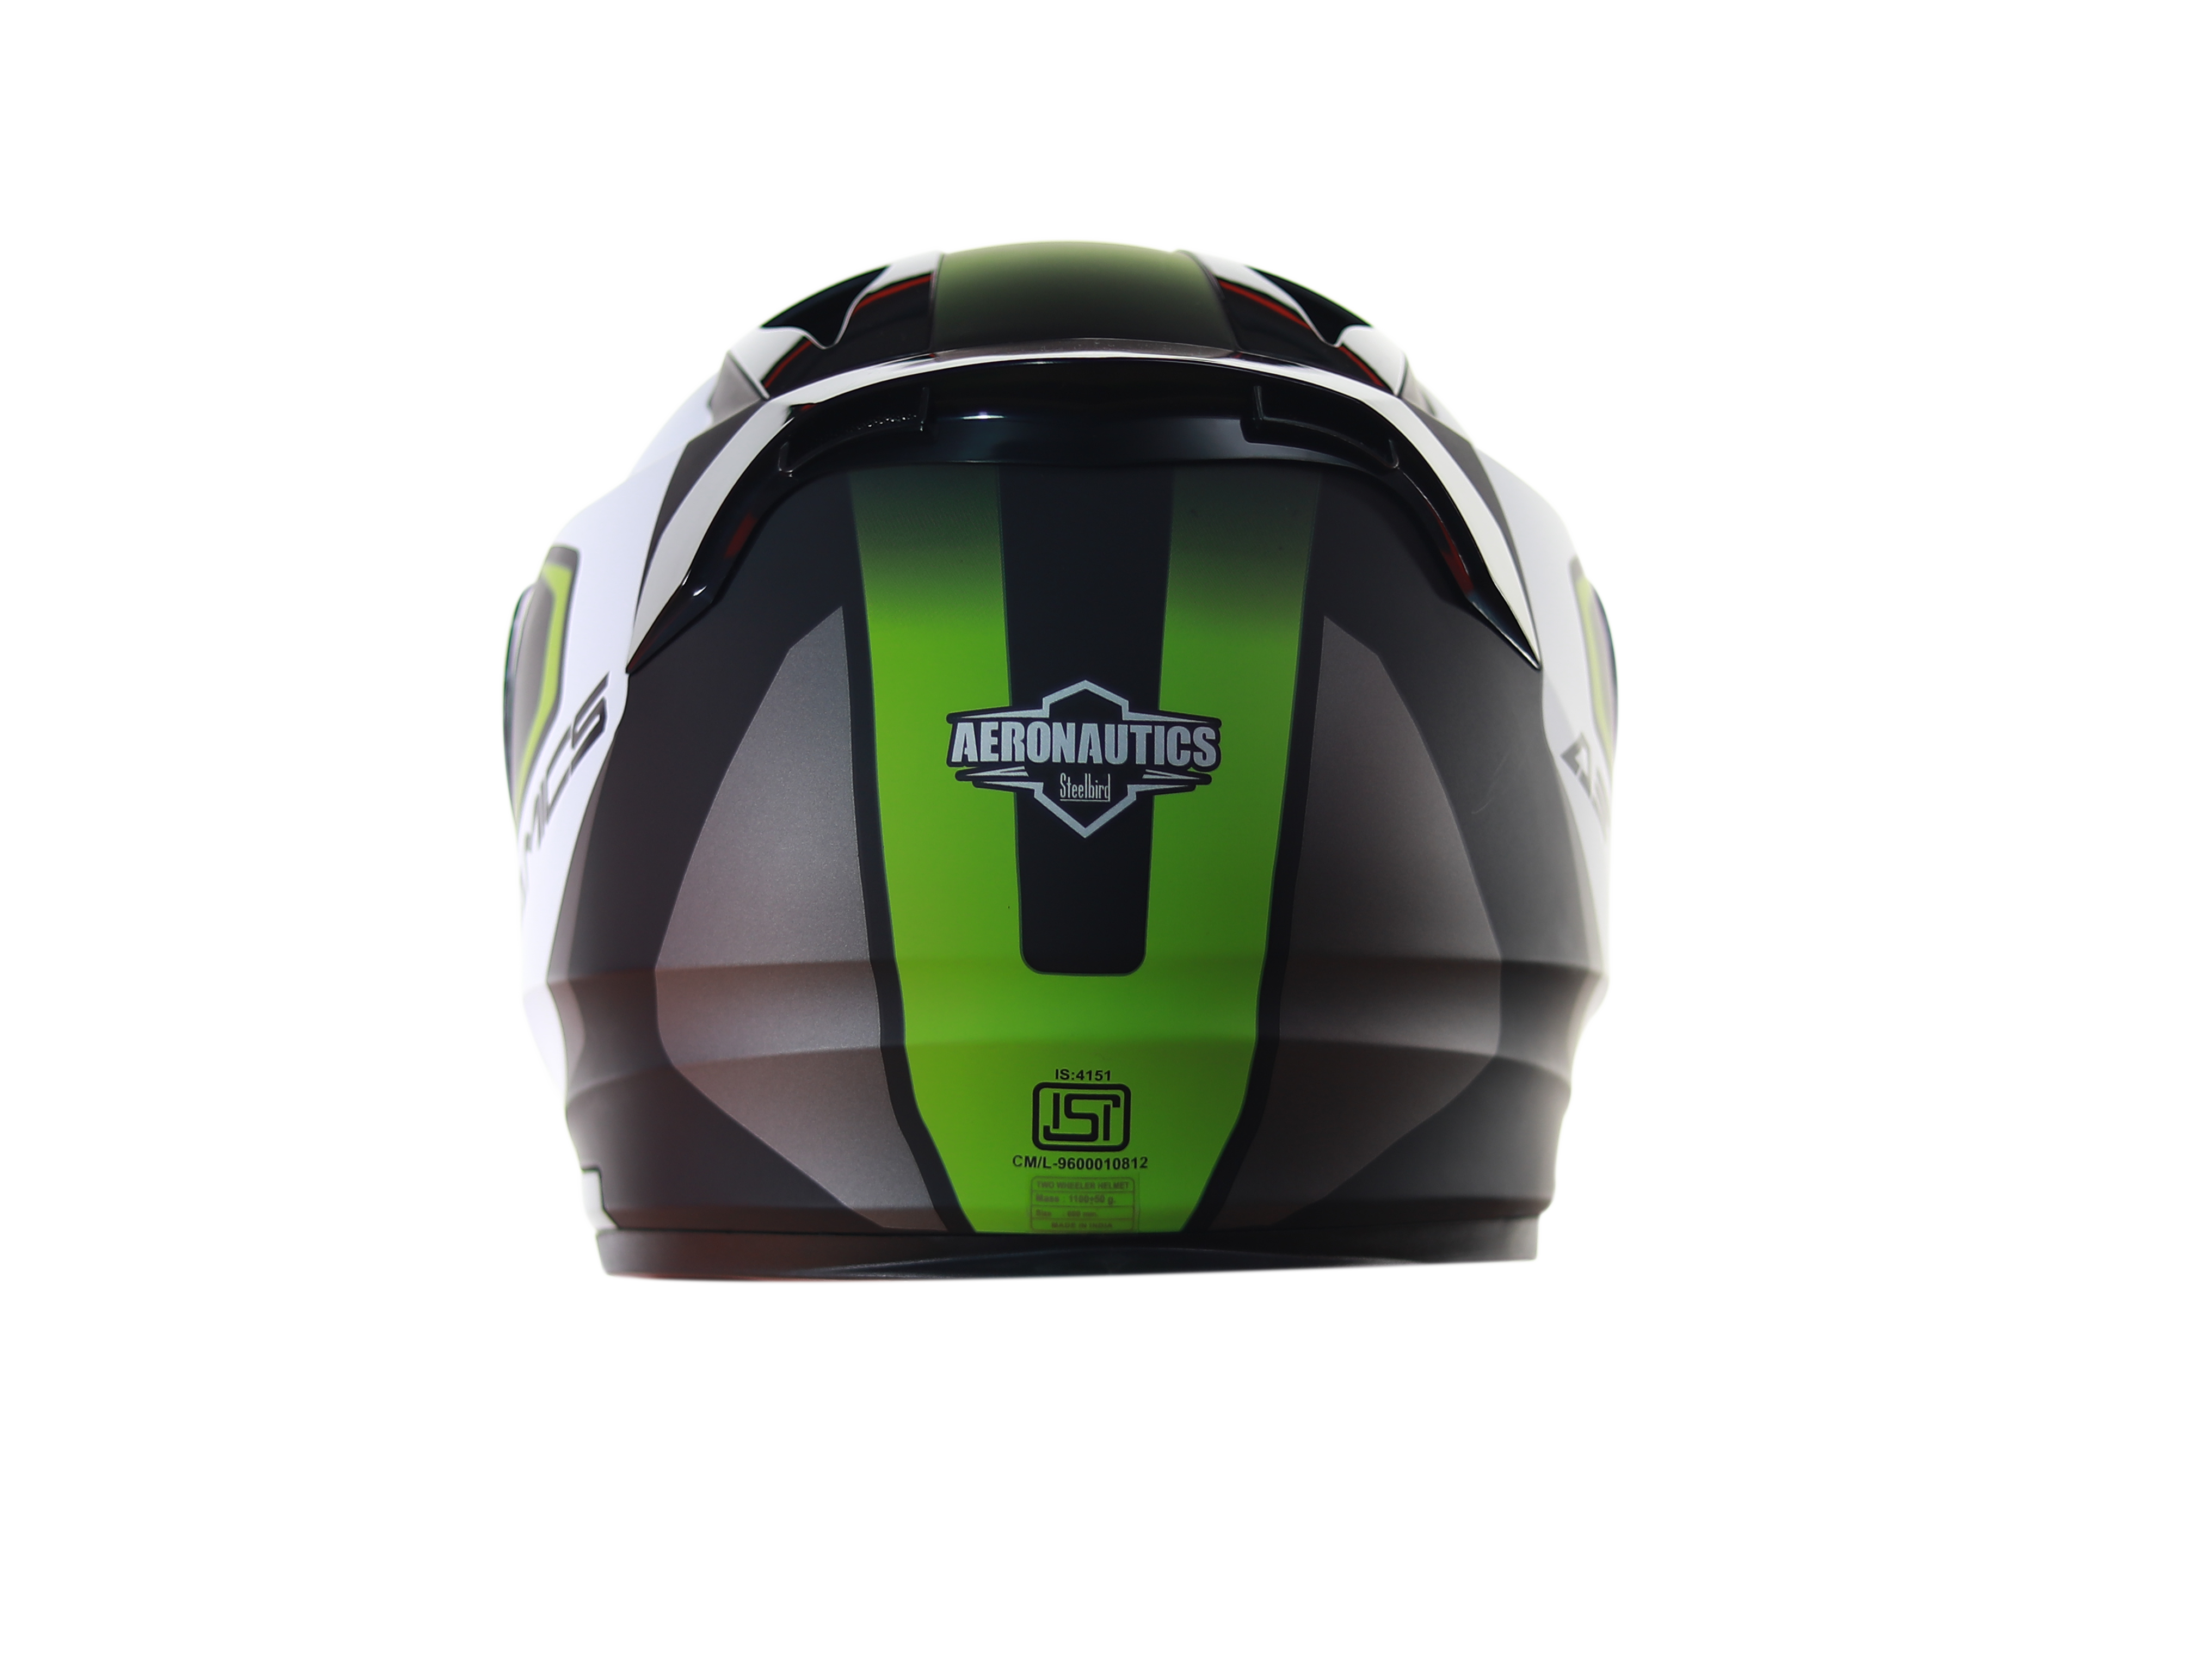 SA-1 Aerodynamics Mat Black With Y.Green(Fitted With Clear Visor Extra Gold Chrome Visor Free)